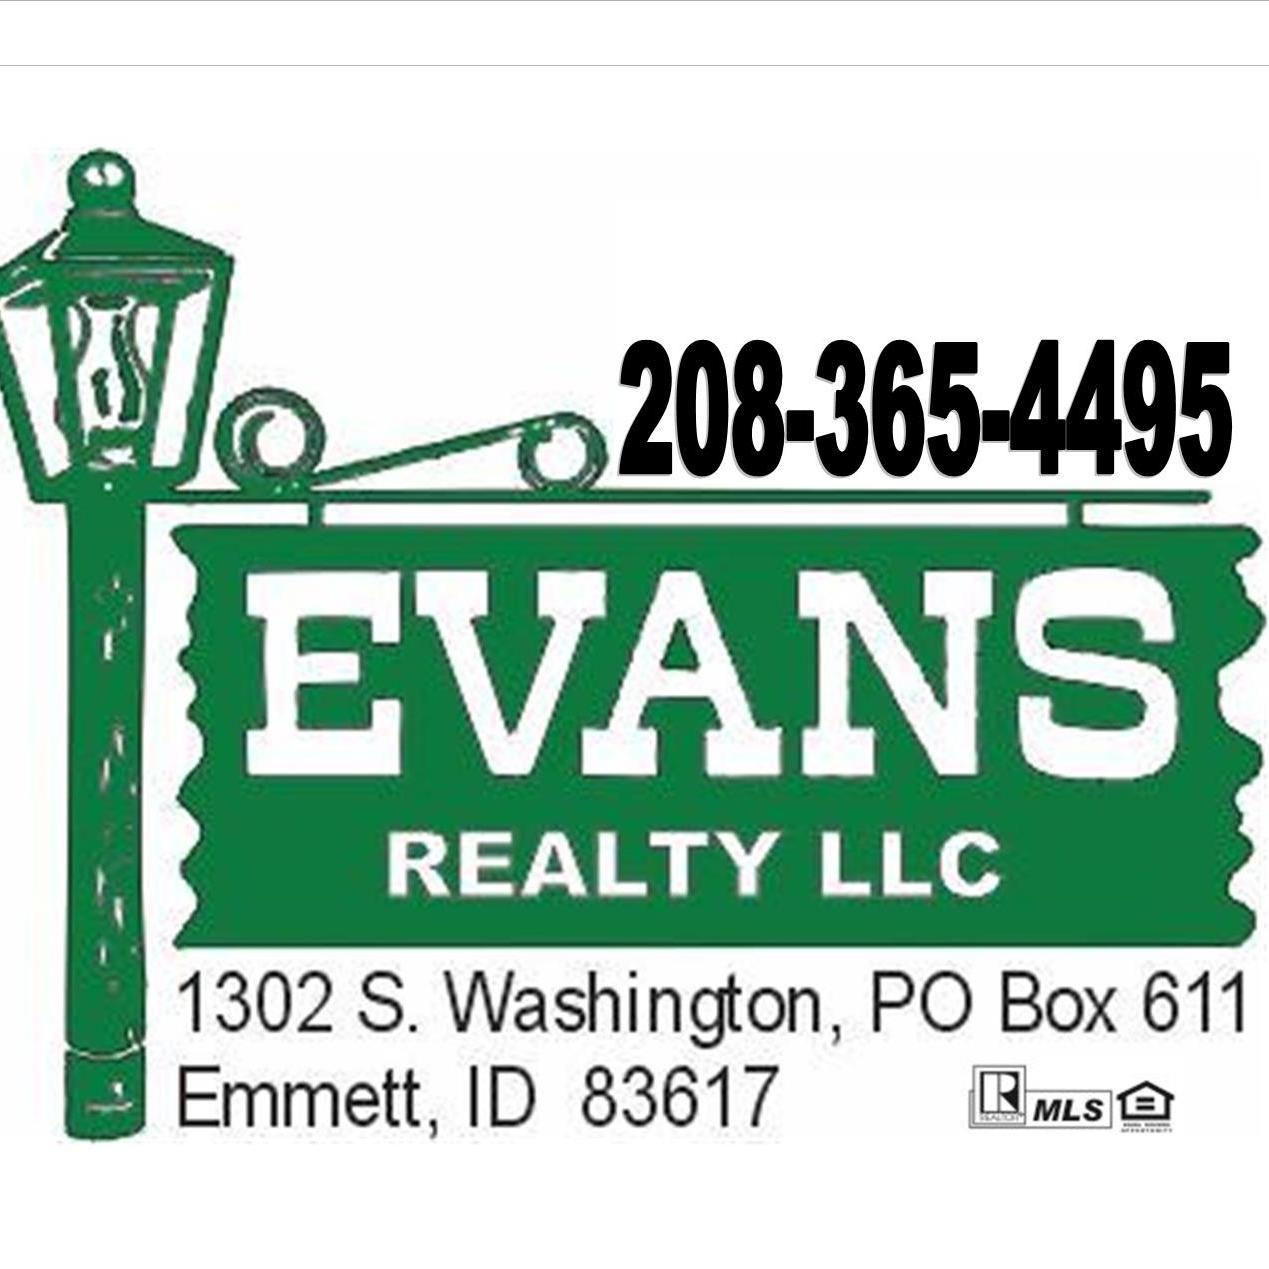 Welcome to Evans Realty LLC!
We are a local full service Real Estate company licensed to service the state of Idaho since 1985!